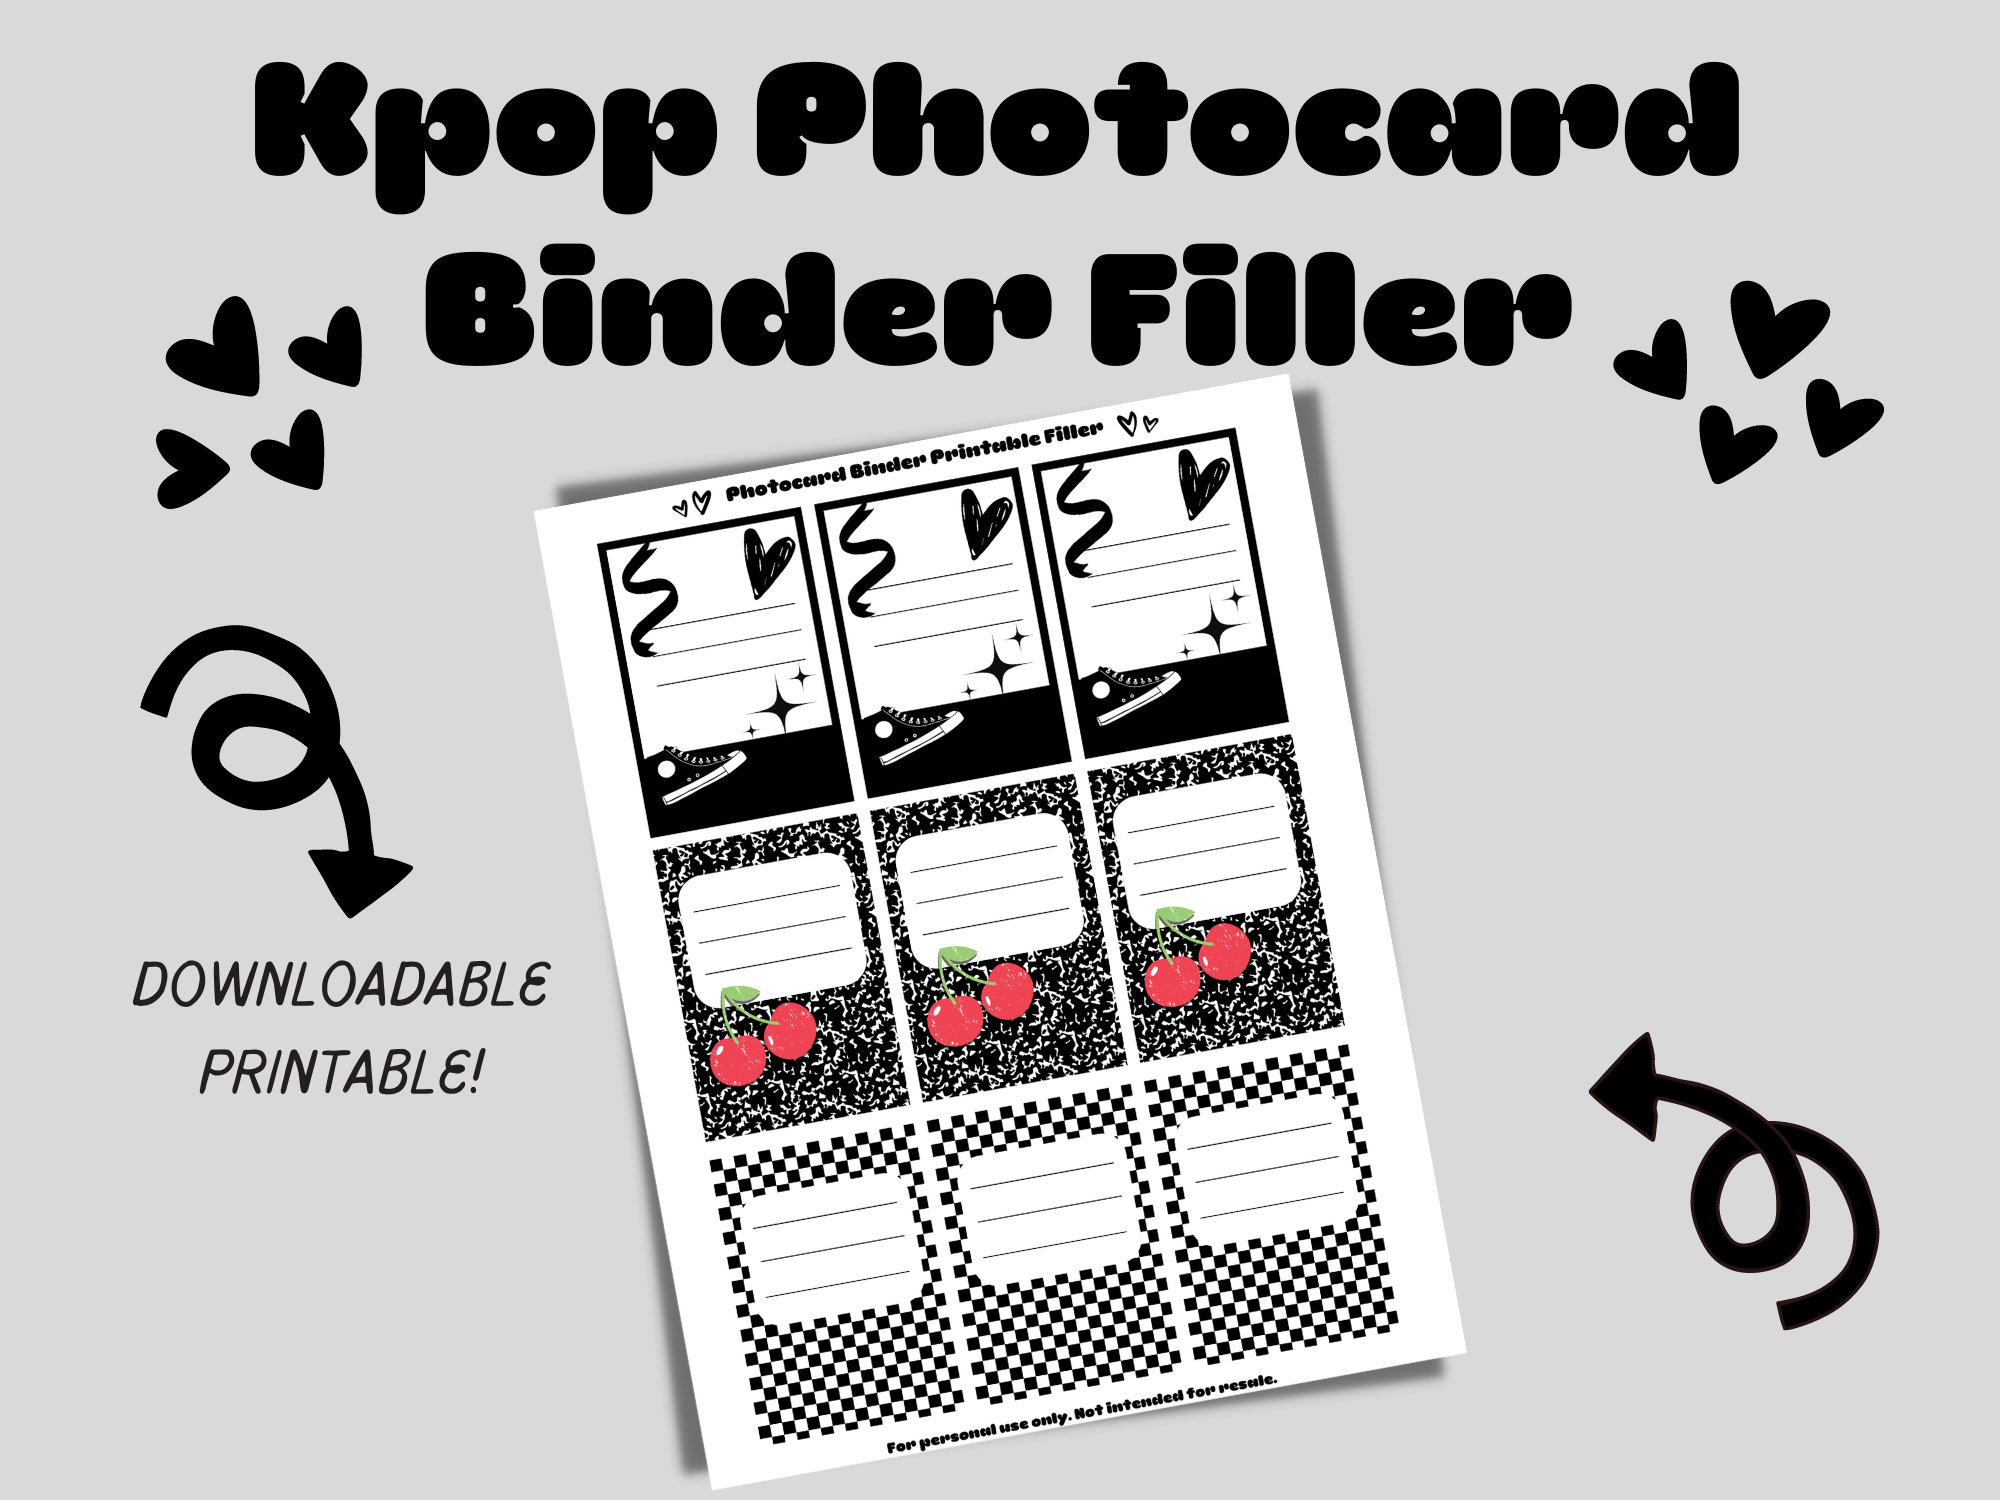 How To Turn Your Kpop Album Into A Photocard Binder